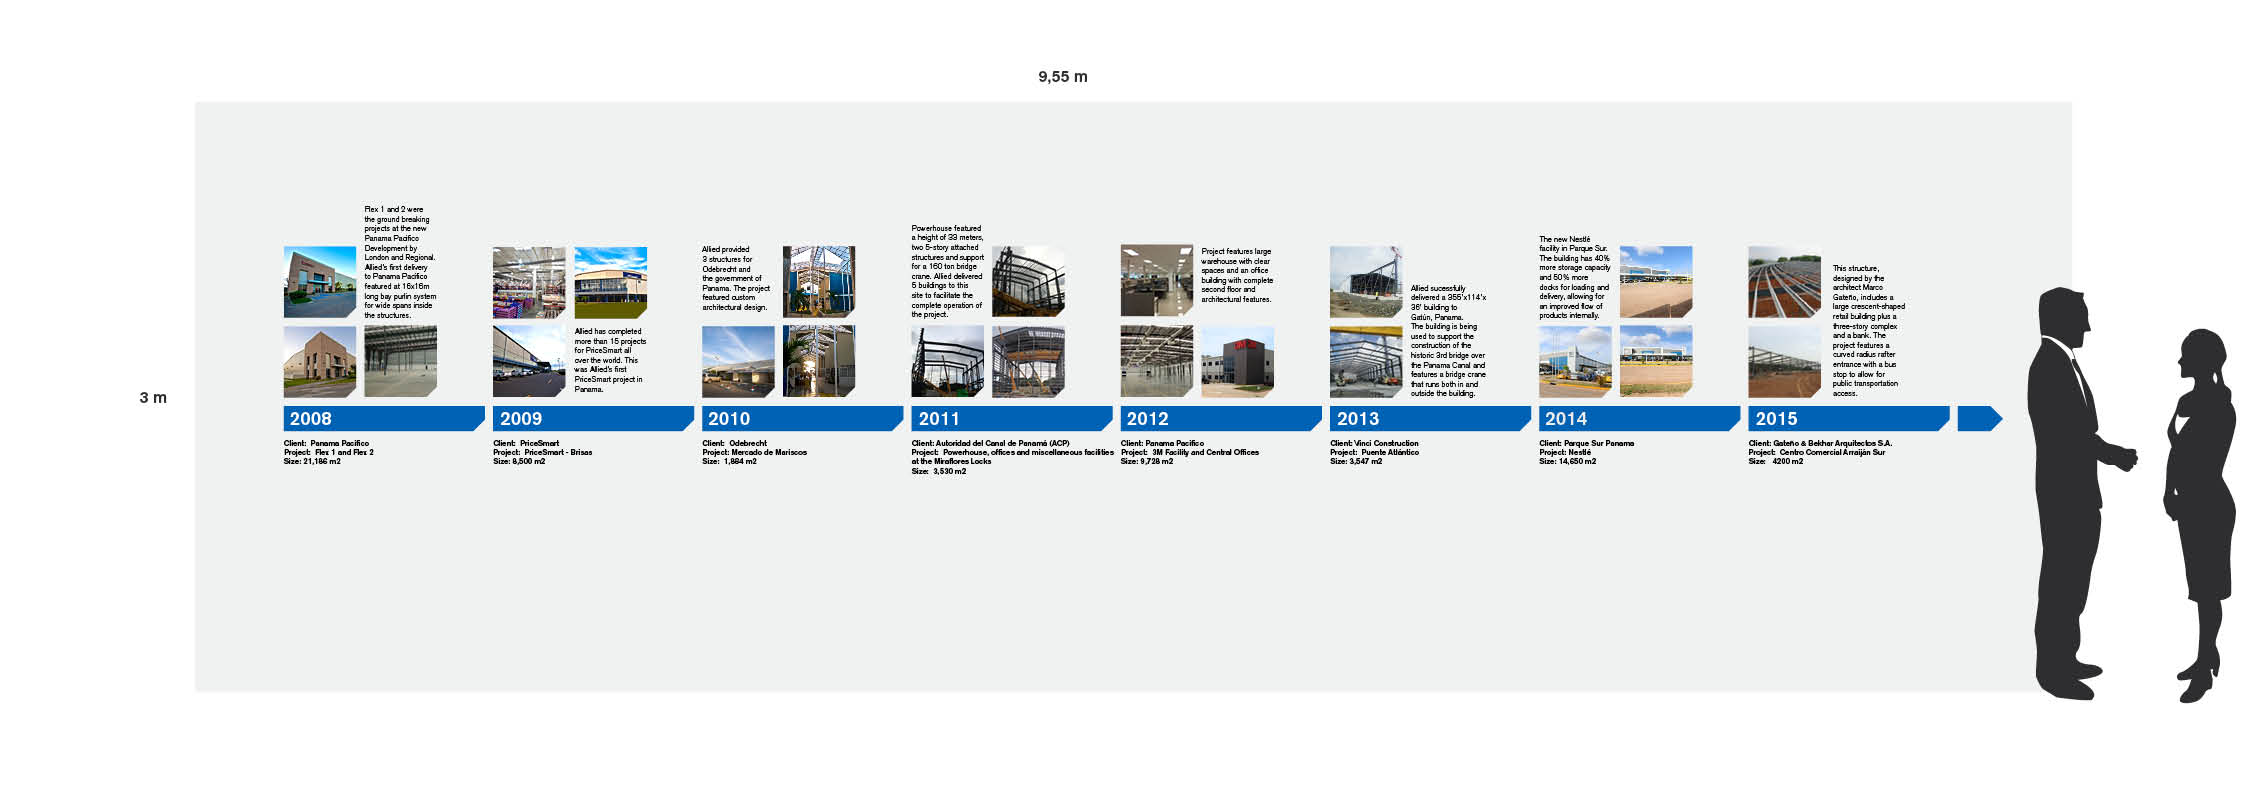 Allied's Project Timeline in Panama